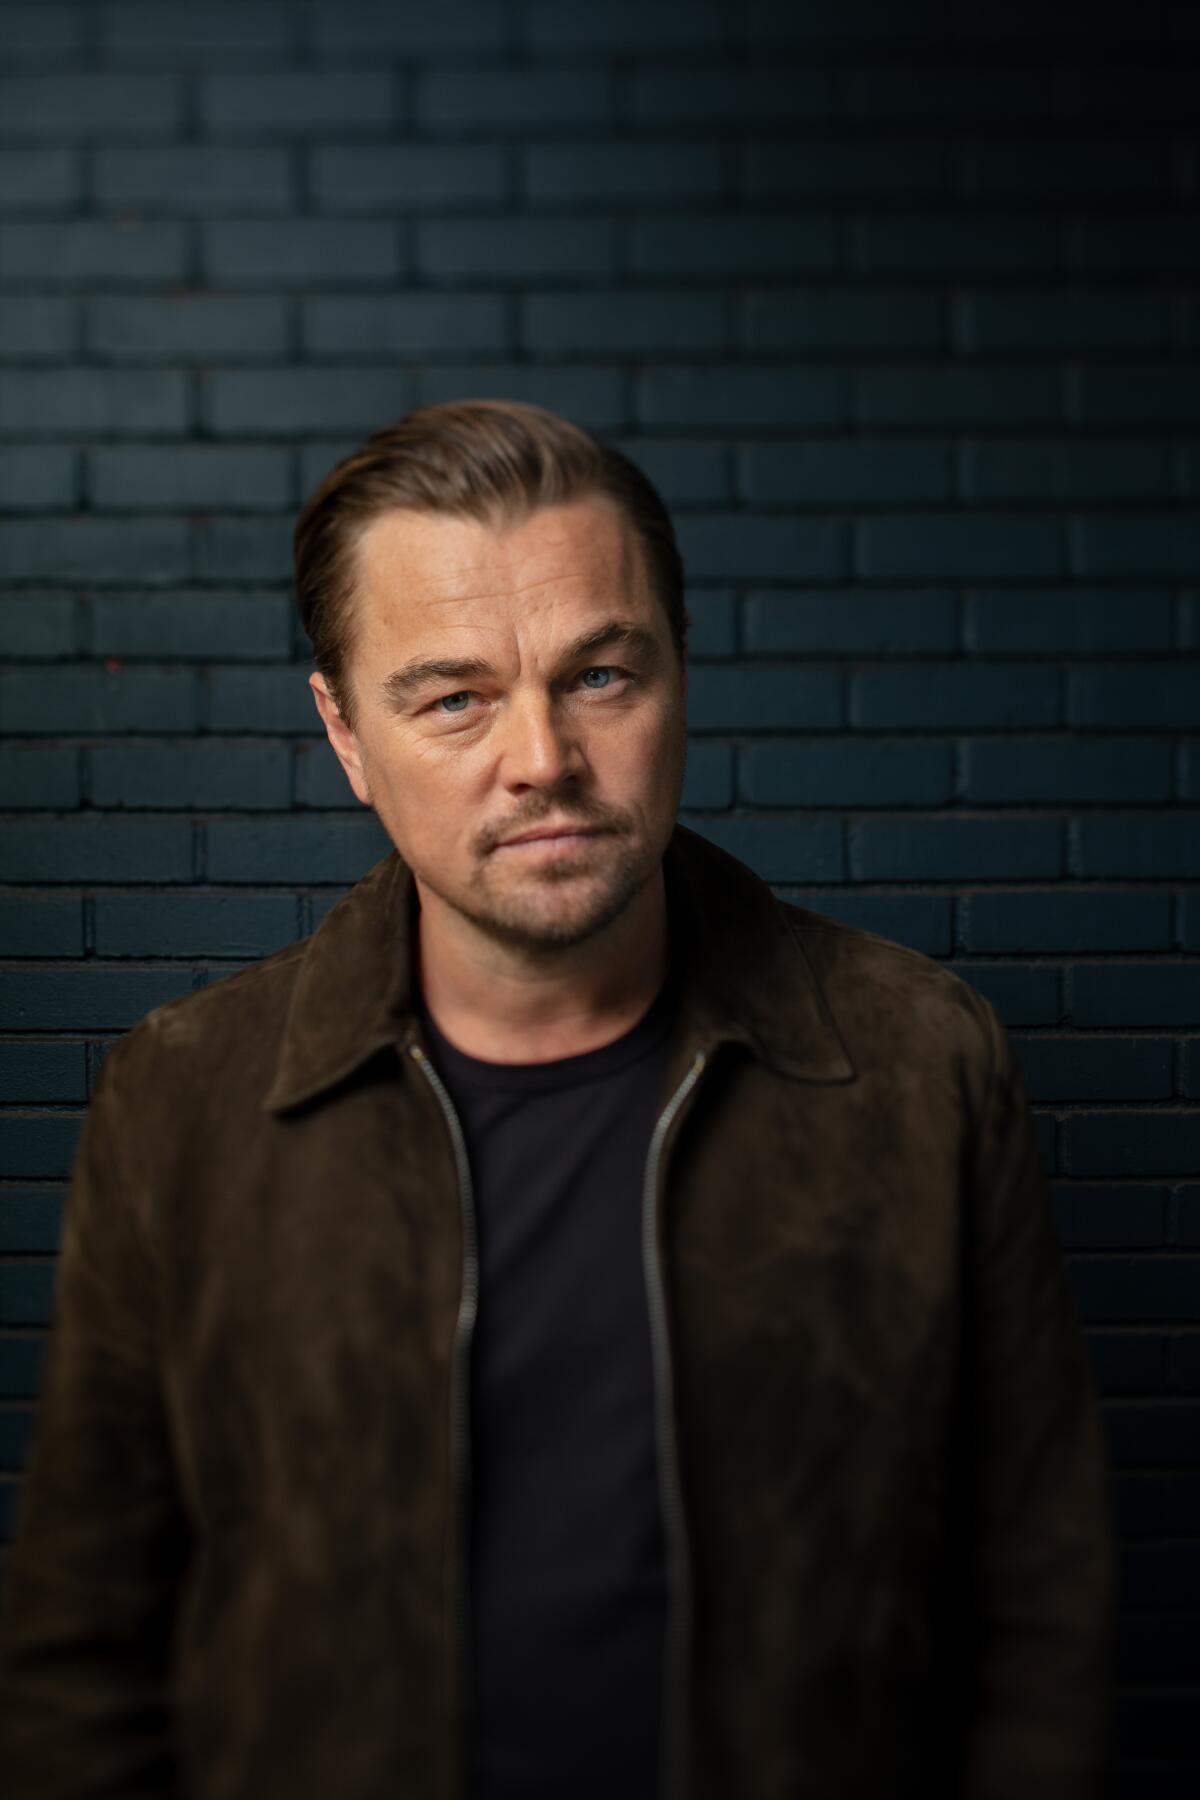 Leonardo DiCaprio stands in front of a dark brick wall for a portrait.